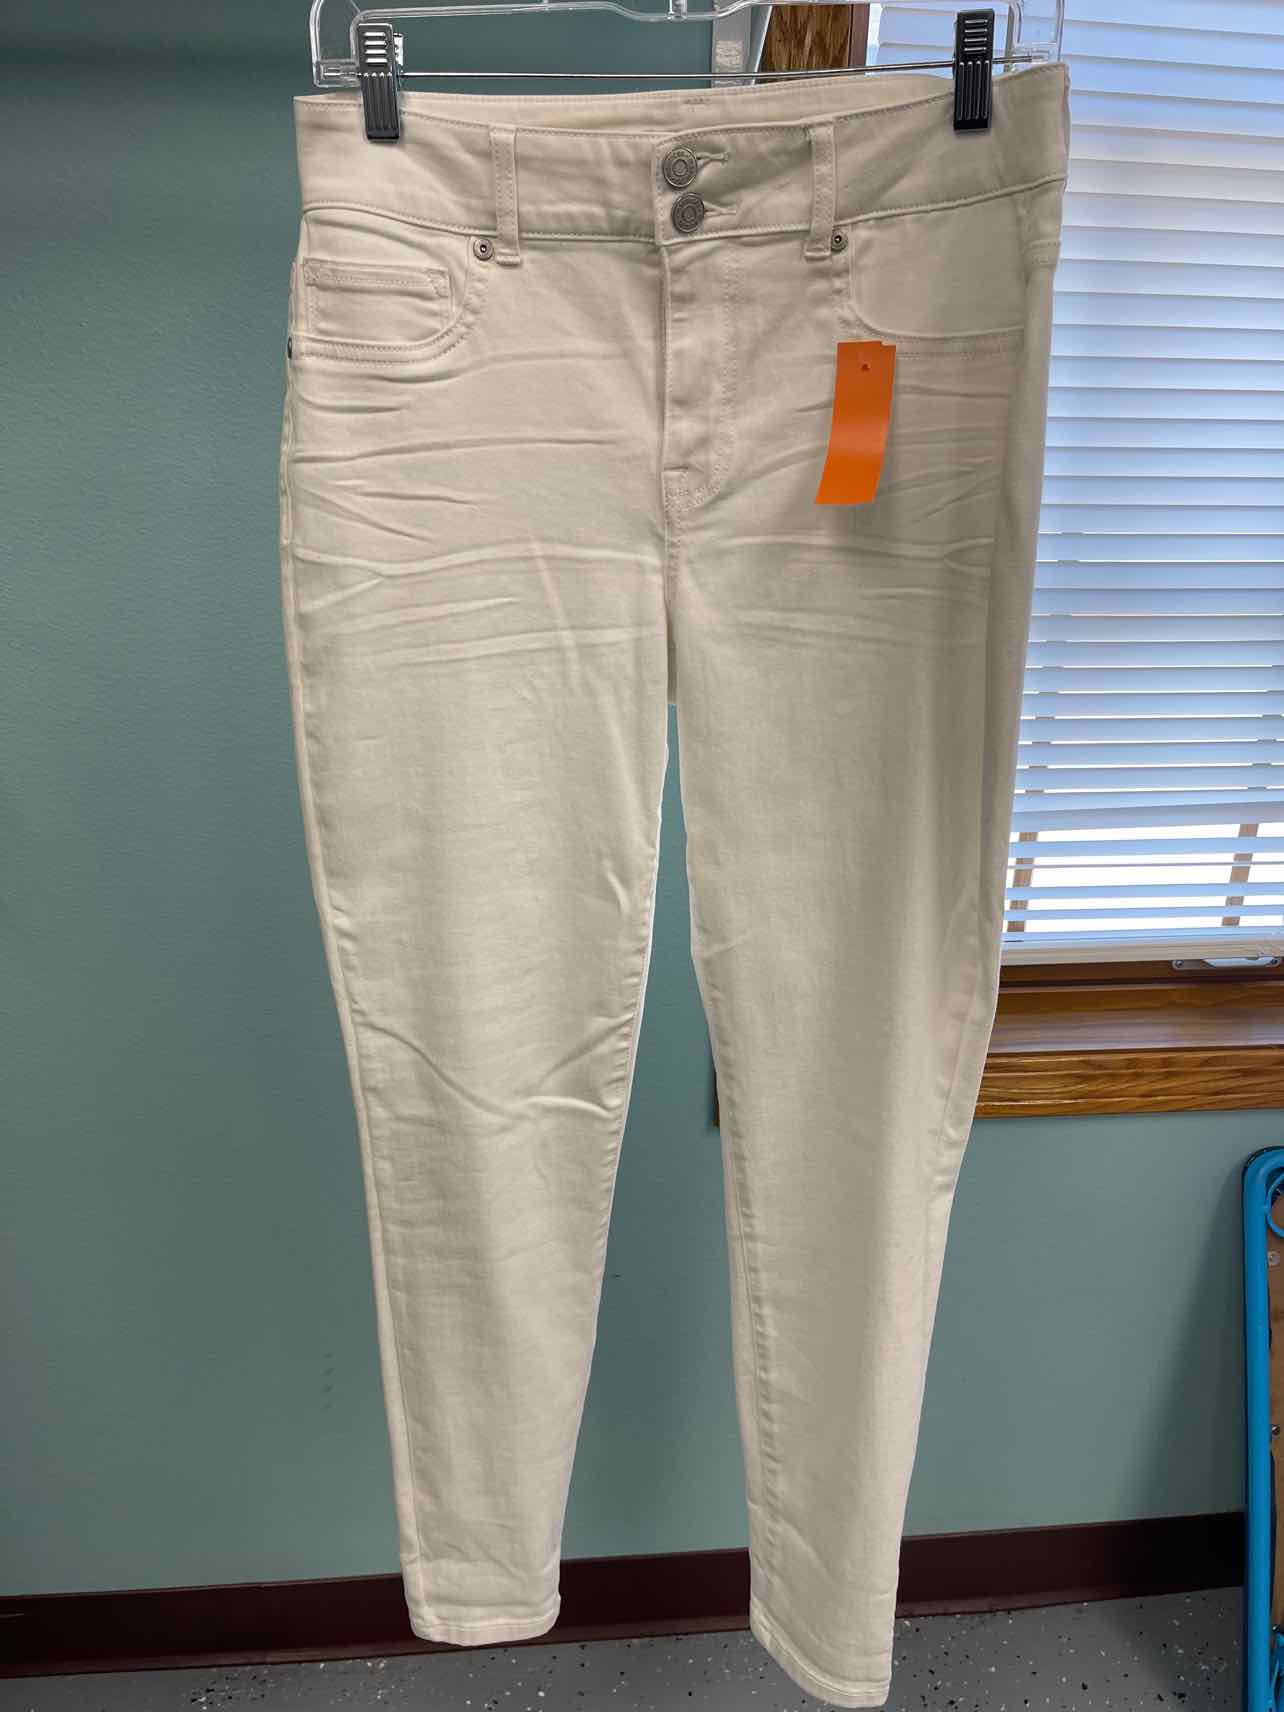 Women's Size Medium Maurices White Jeans